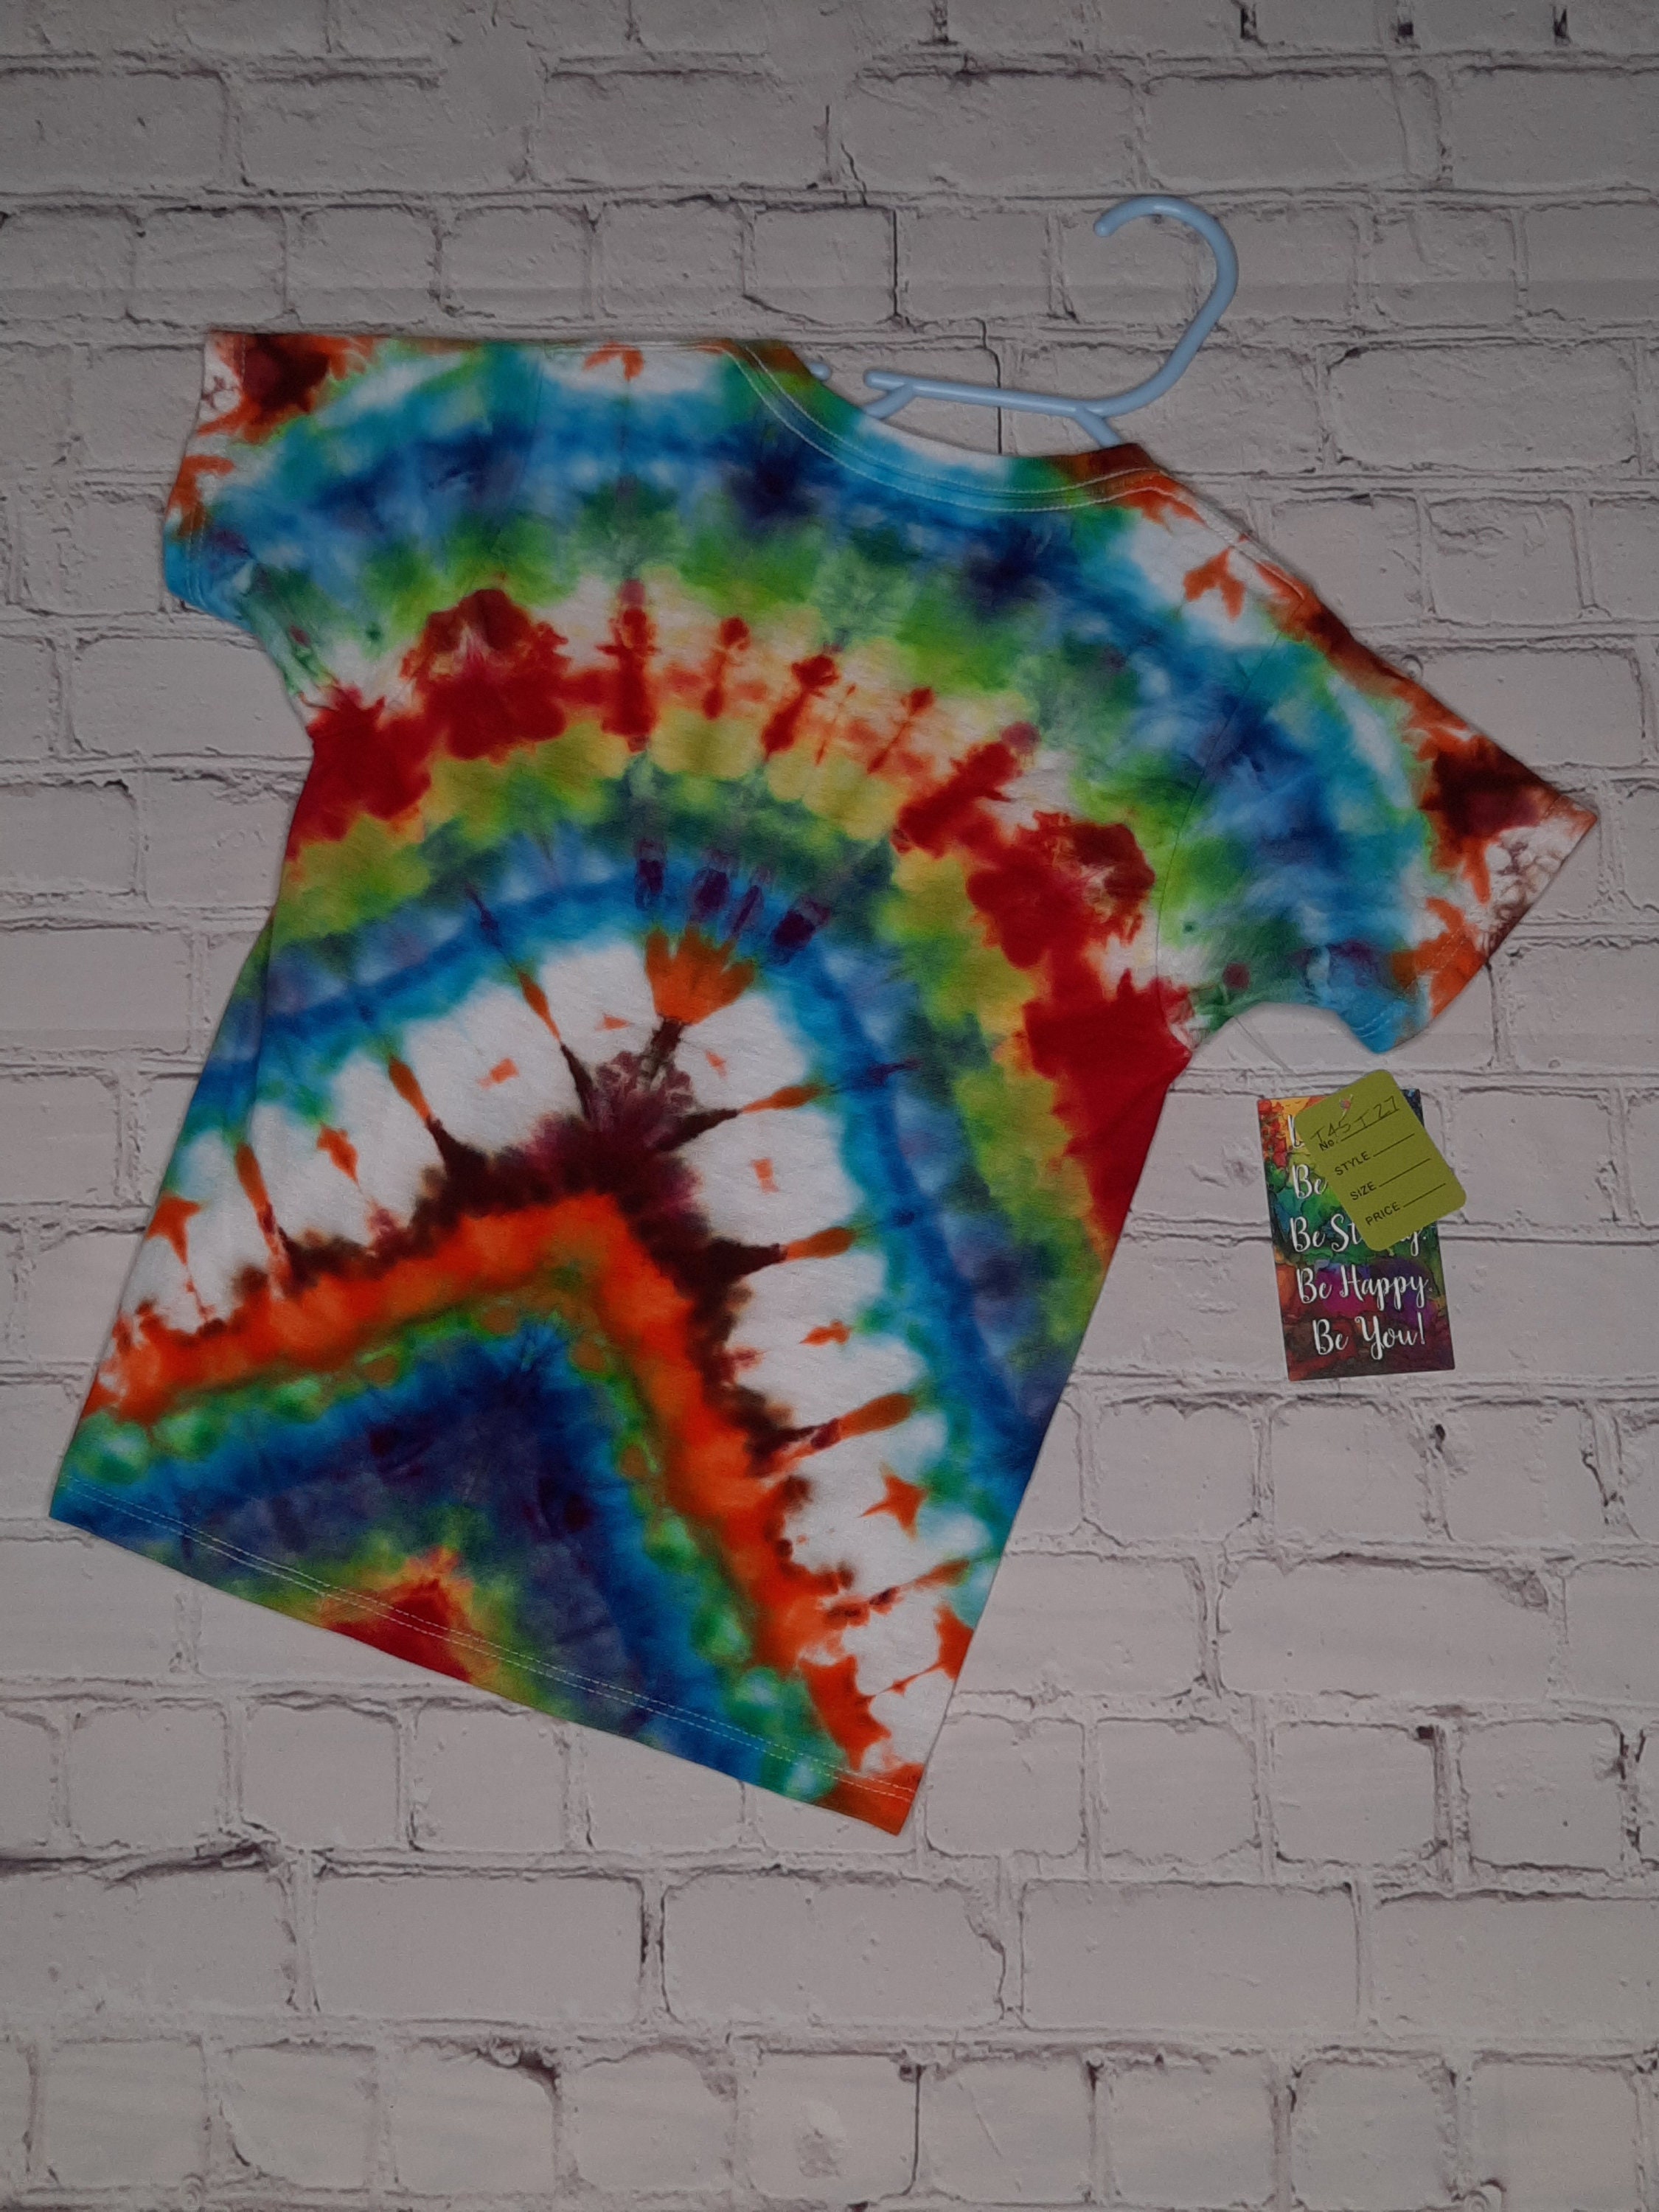 Crafts: Duds to tie dye for